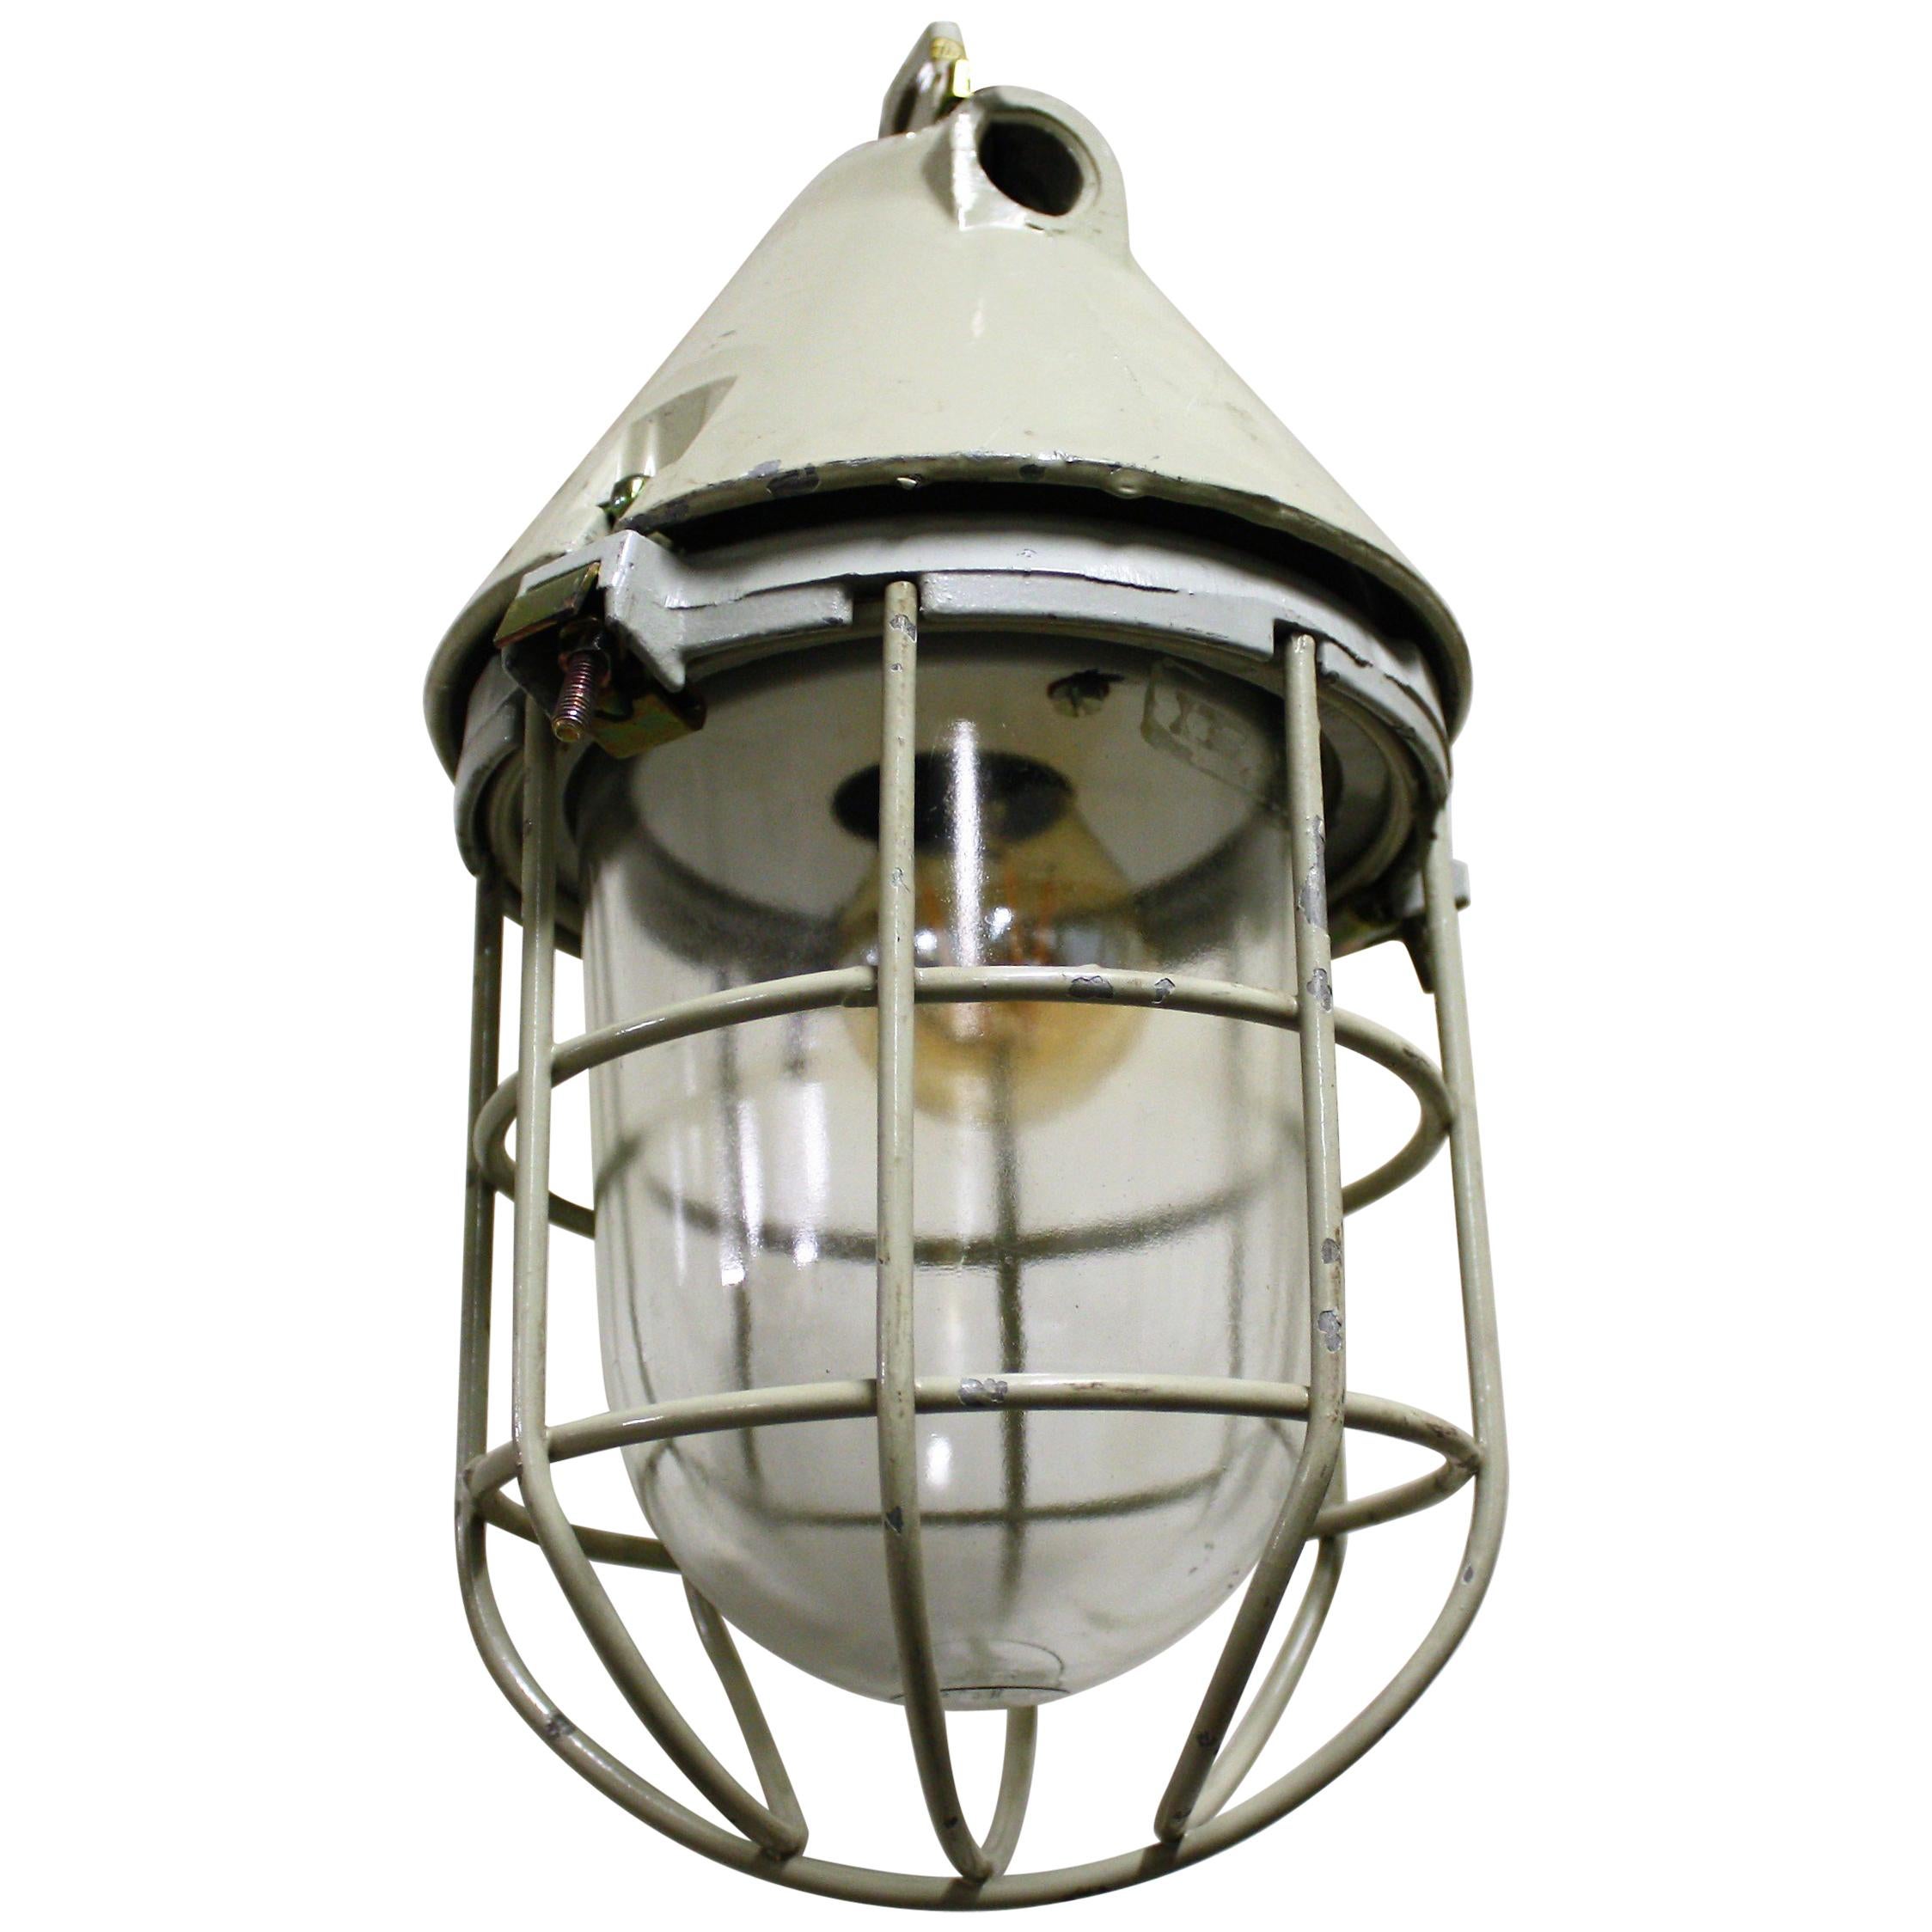 Vintage Industrial Caged Bully or Bunker Lamp by EOW Germany